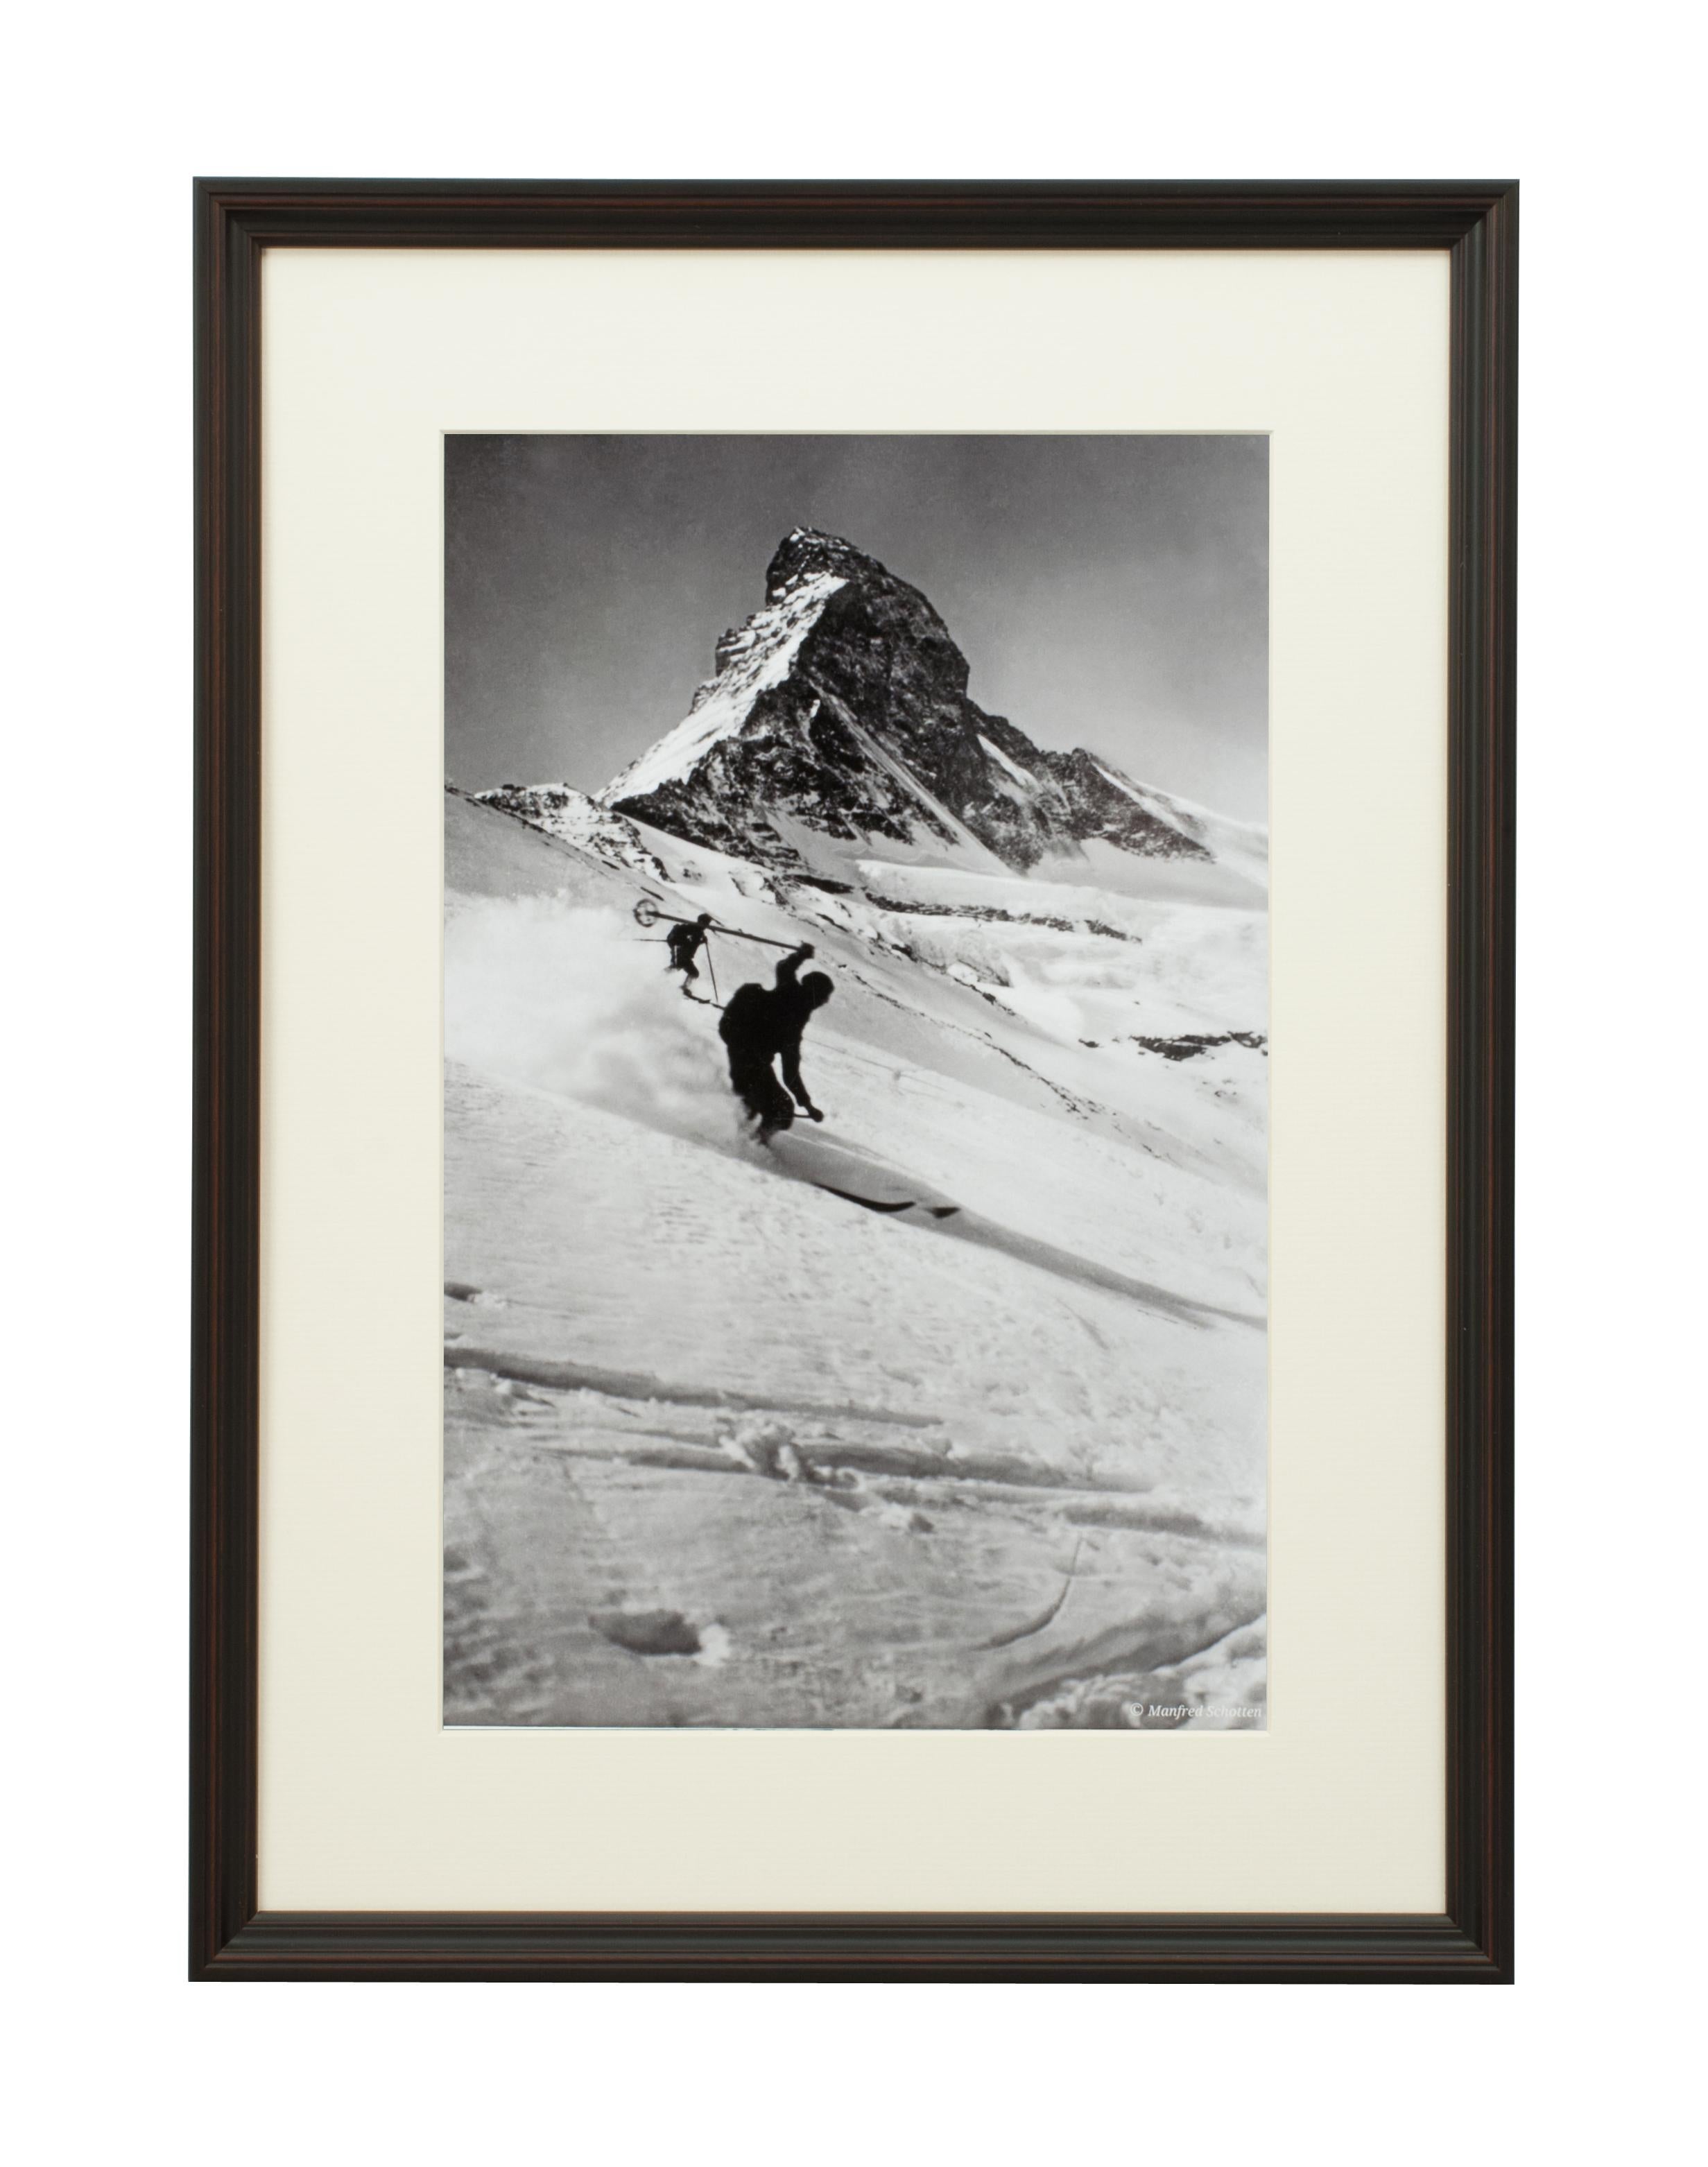 Vintage style ski photography, framed Alpine ski photograph, Matterhorn & Skiers.
'MATTERHORN & SKIERS', a modern framed and mounted black and white photograph after an original 1930's skiing photograph. The frame is black with burgundy undercoat,